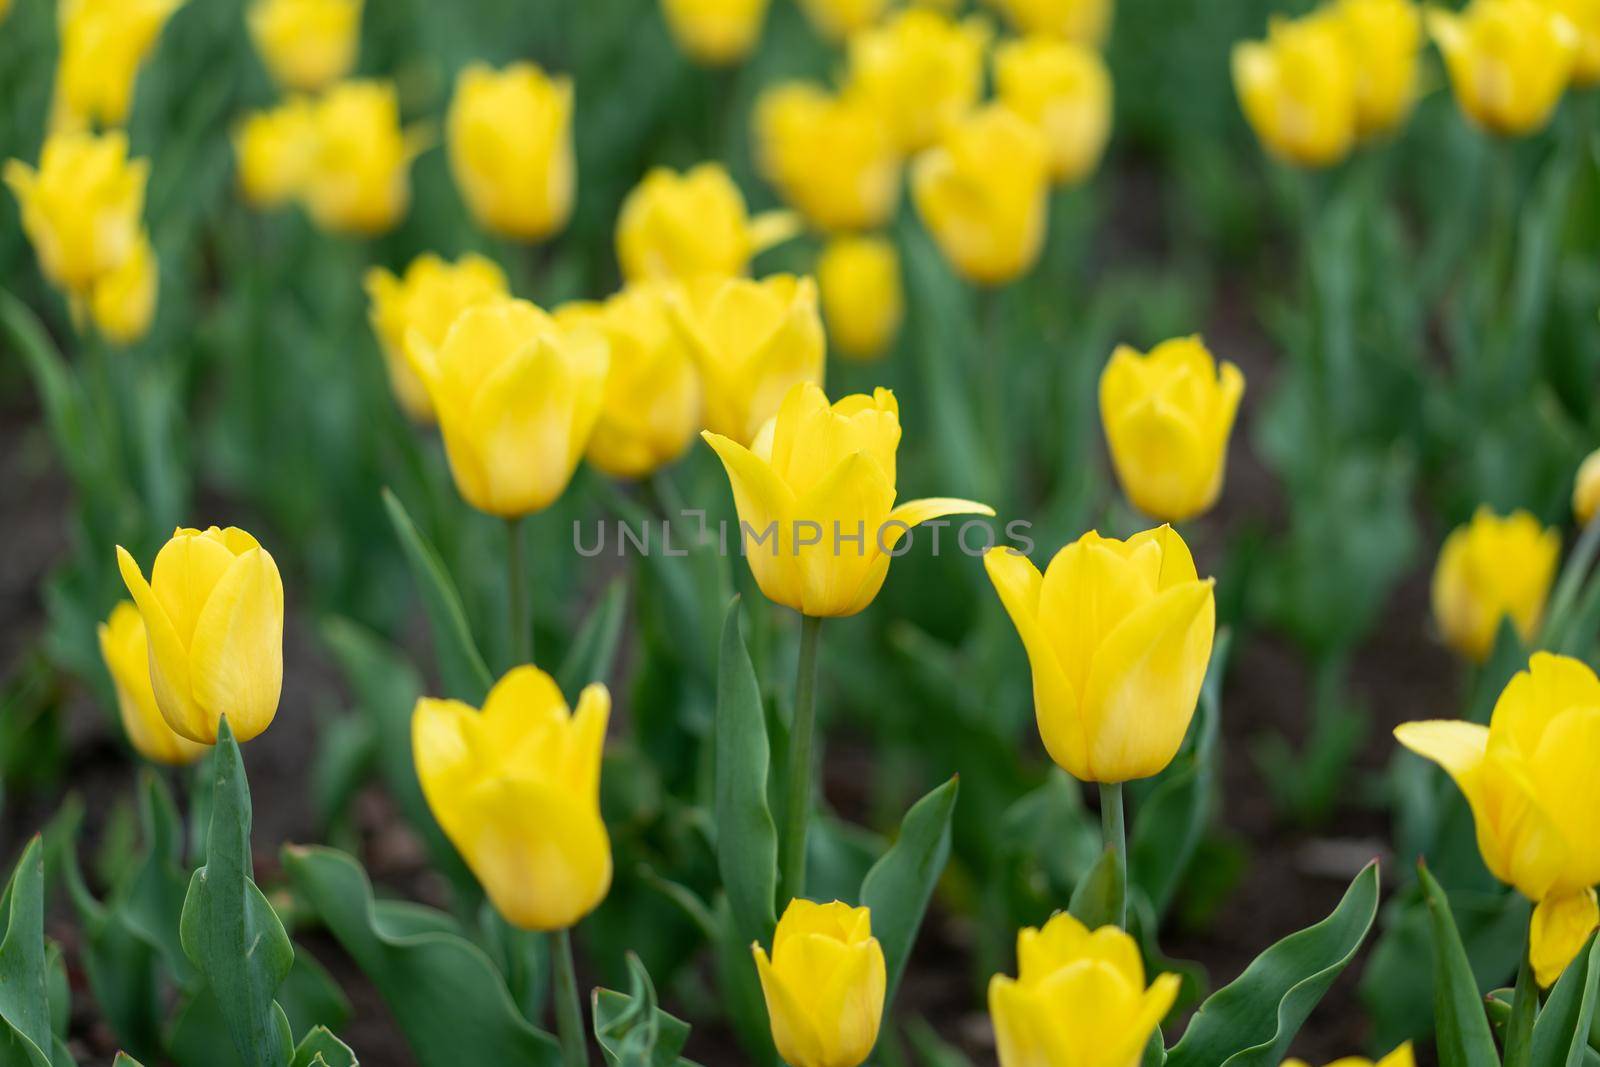 Yellow flowers background outdoor Spring season flowers Selective focus